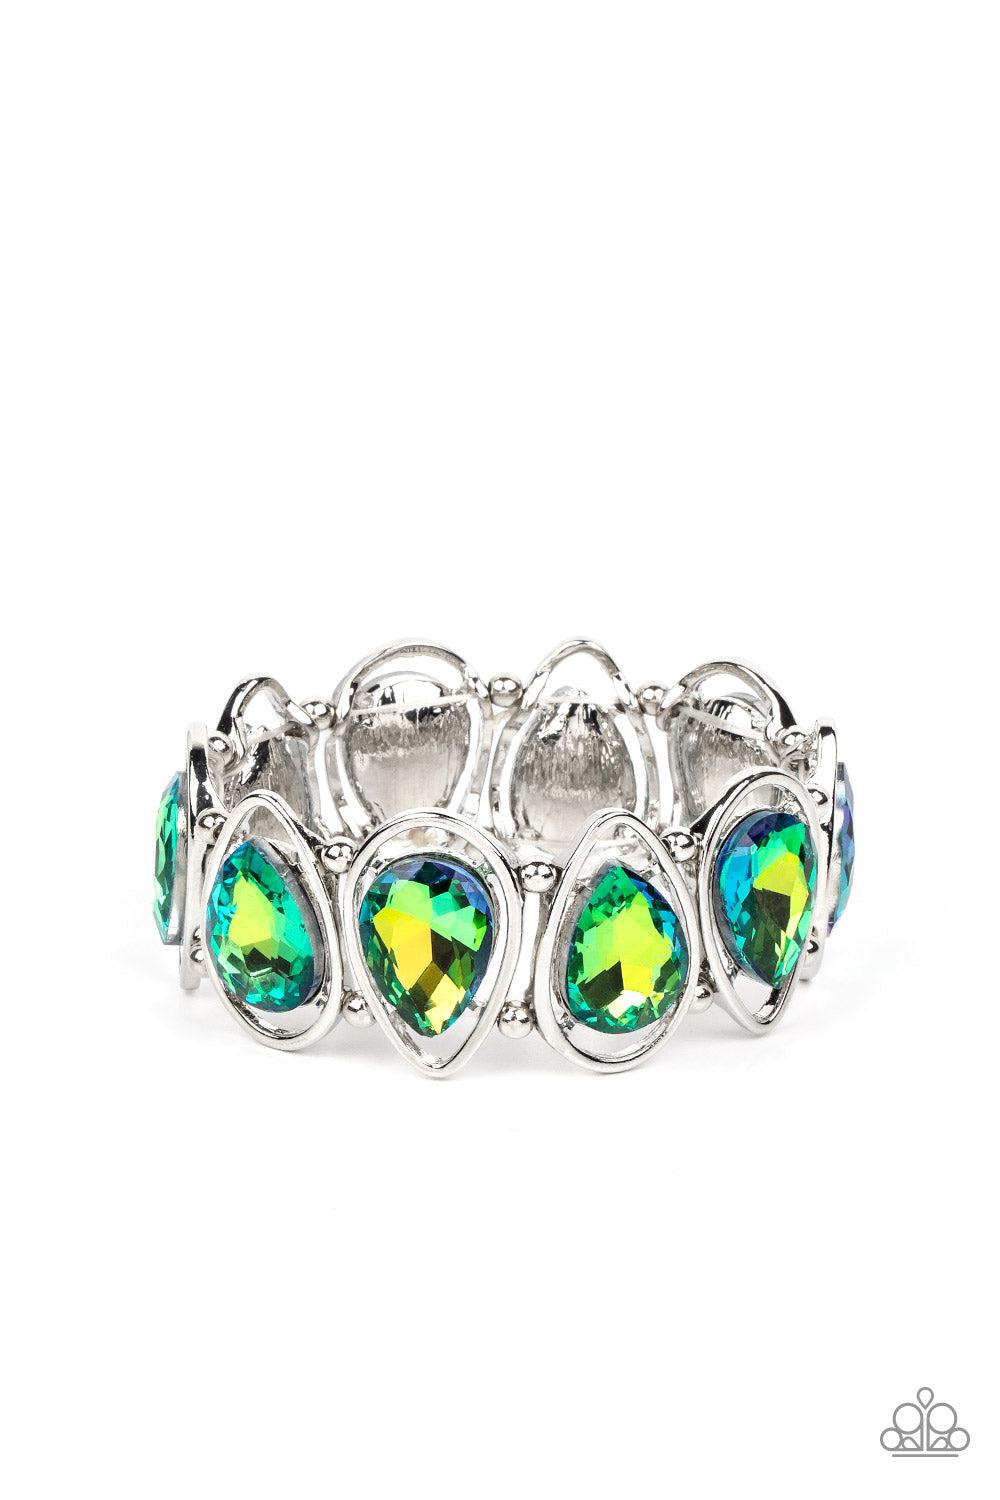 The Sparkle Society Multi Green UV Shimmer Bracelet - Paparazzi Accessories- lightbox - CarasShop.com - $5 Jewelry by Cara Jewels